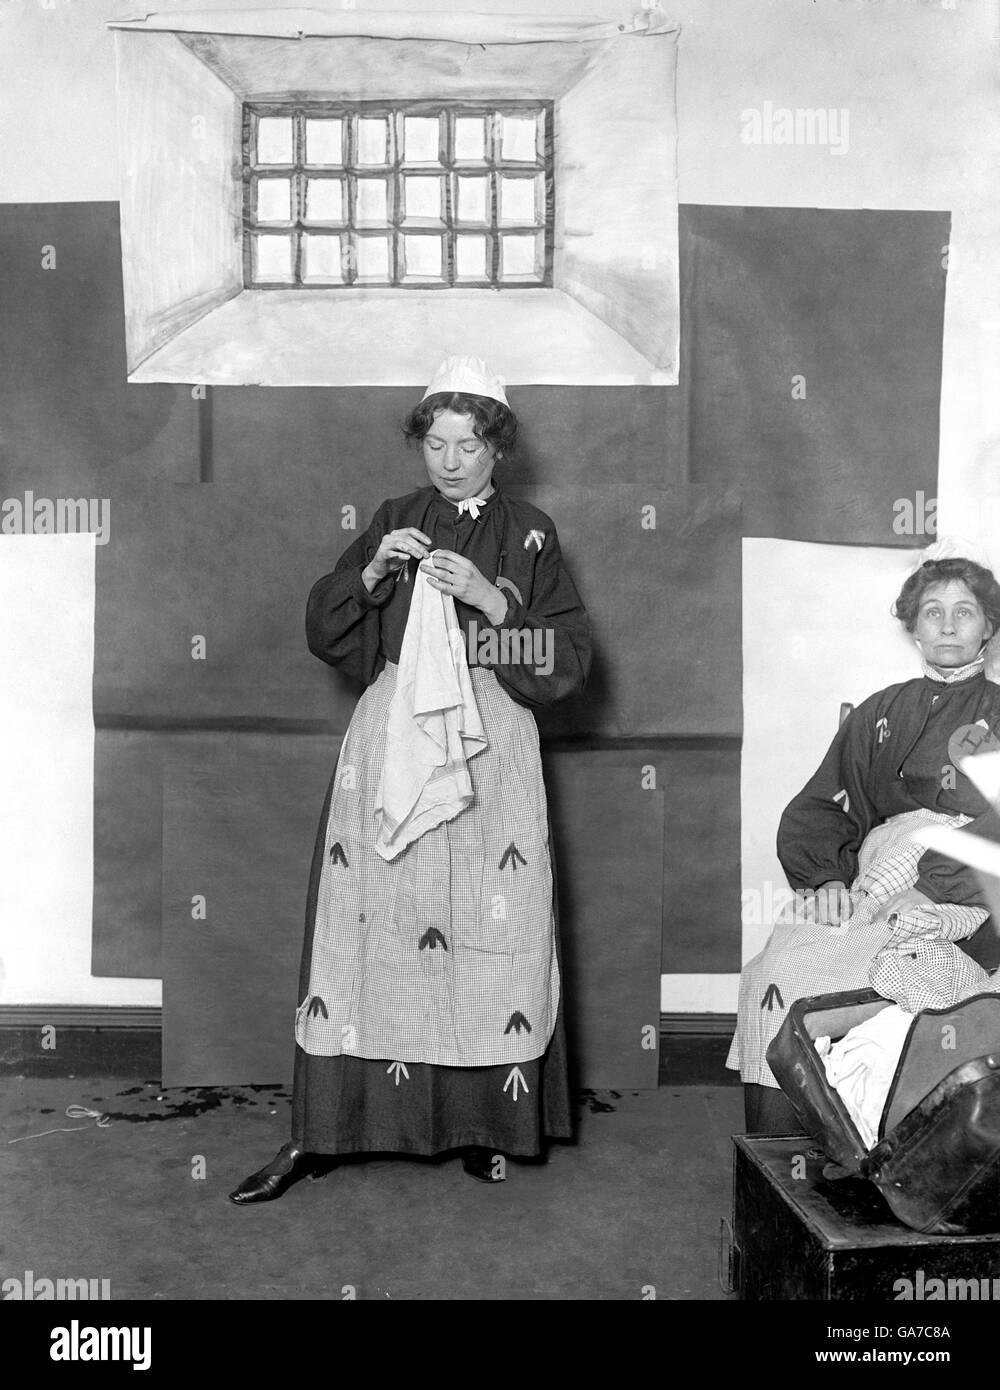 One of the founders of the British suffragette movement Emmeline Pankhurst (right) is seen in Prison costume along with her daughter Christabel. Stock Photo